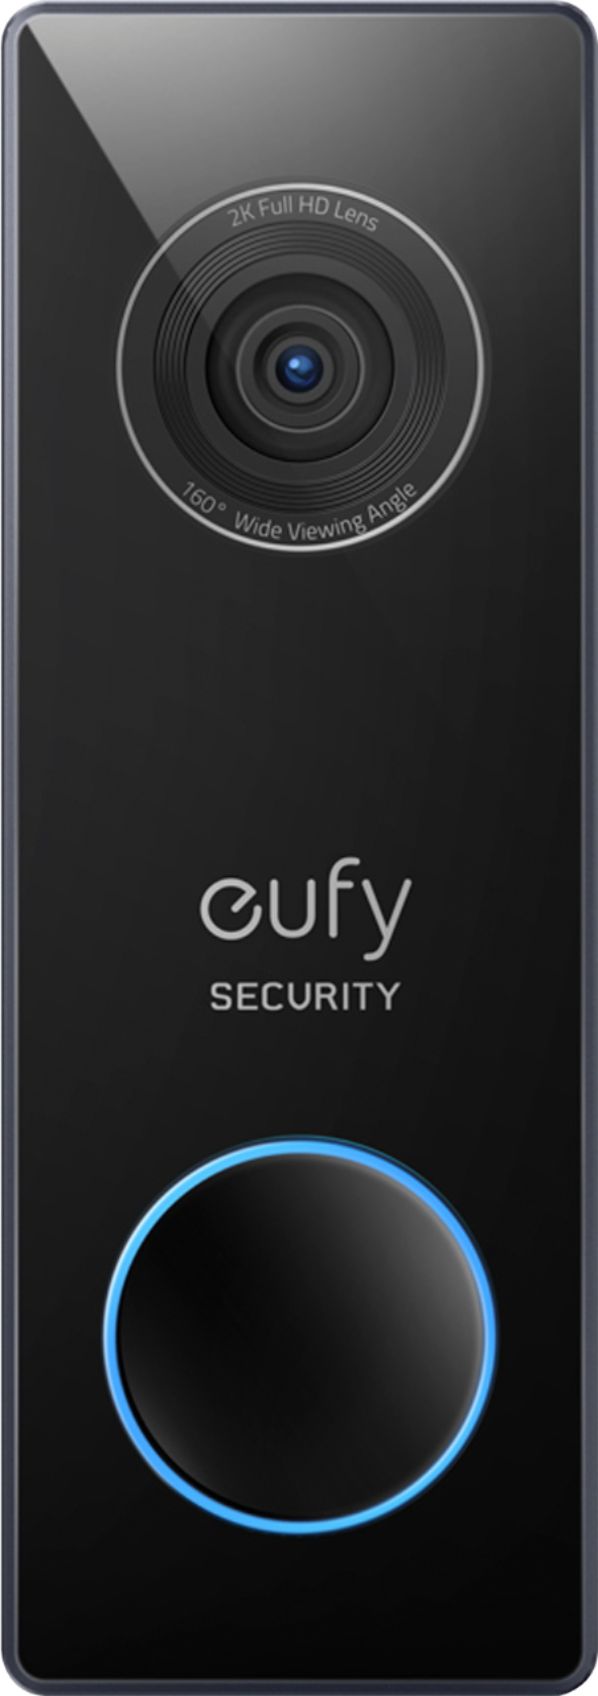  eufy Security, Wi-Fi Doorbell Camera, 2K Resolution, No Monthly  Fees, Local Storage, Human Detection, with Wireless Chime—Requires Existing  Doorbell Wires and Installation Experience, 16-24 VAC, 30 VA : Tools & Home